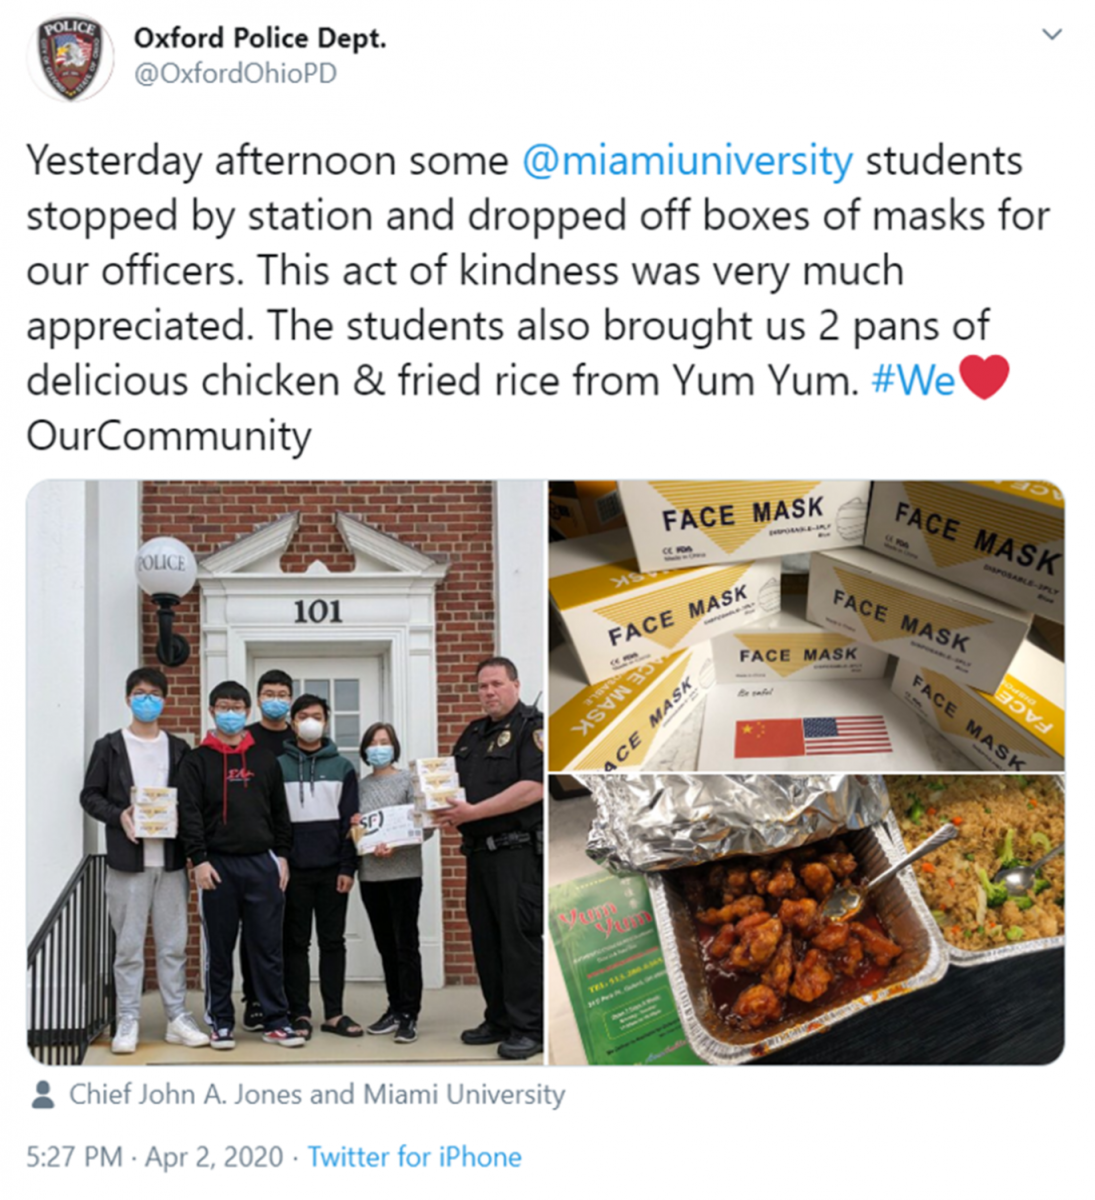 Oxford Police posted their thanks as well as some pictures about the Chinese students and parents who donated masks to the department on the department’s Facebook page. The pictures show Police Chief John Johns accepting the masks from a group of students, as well as the boxes of masks and trays of food the students gave to police.